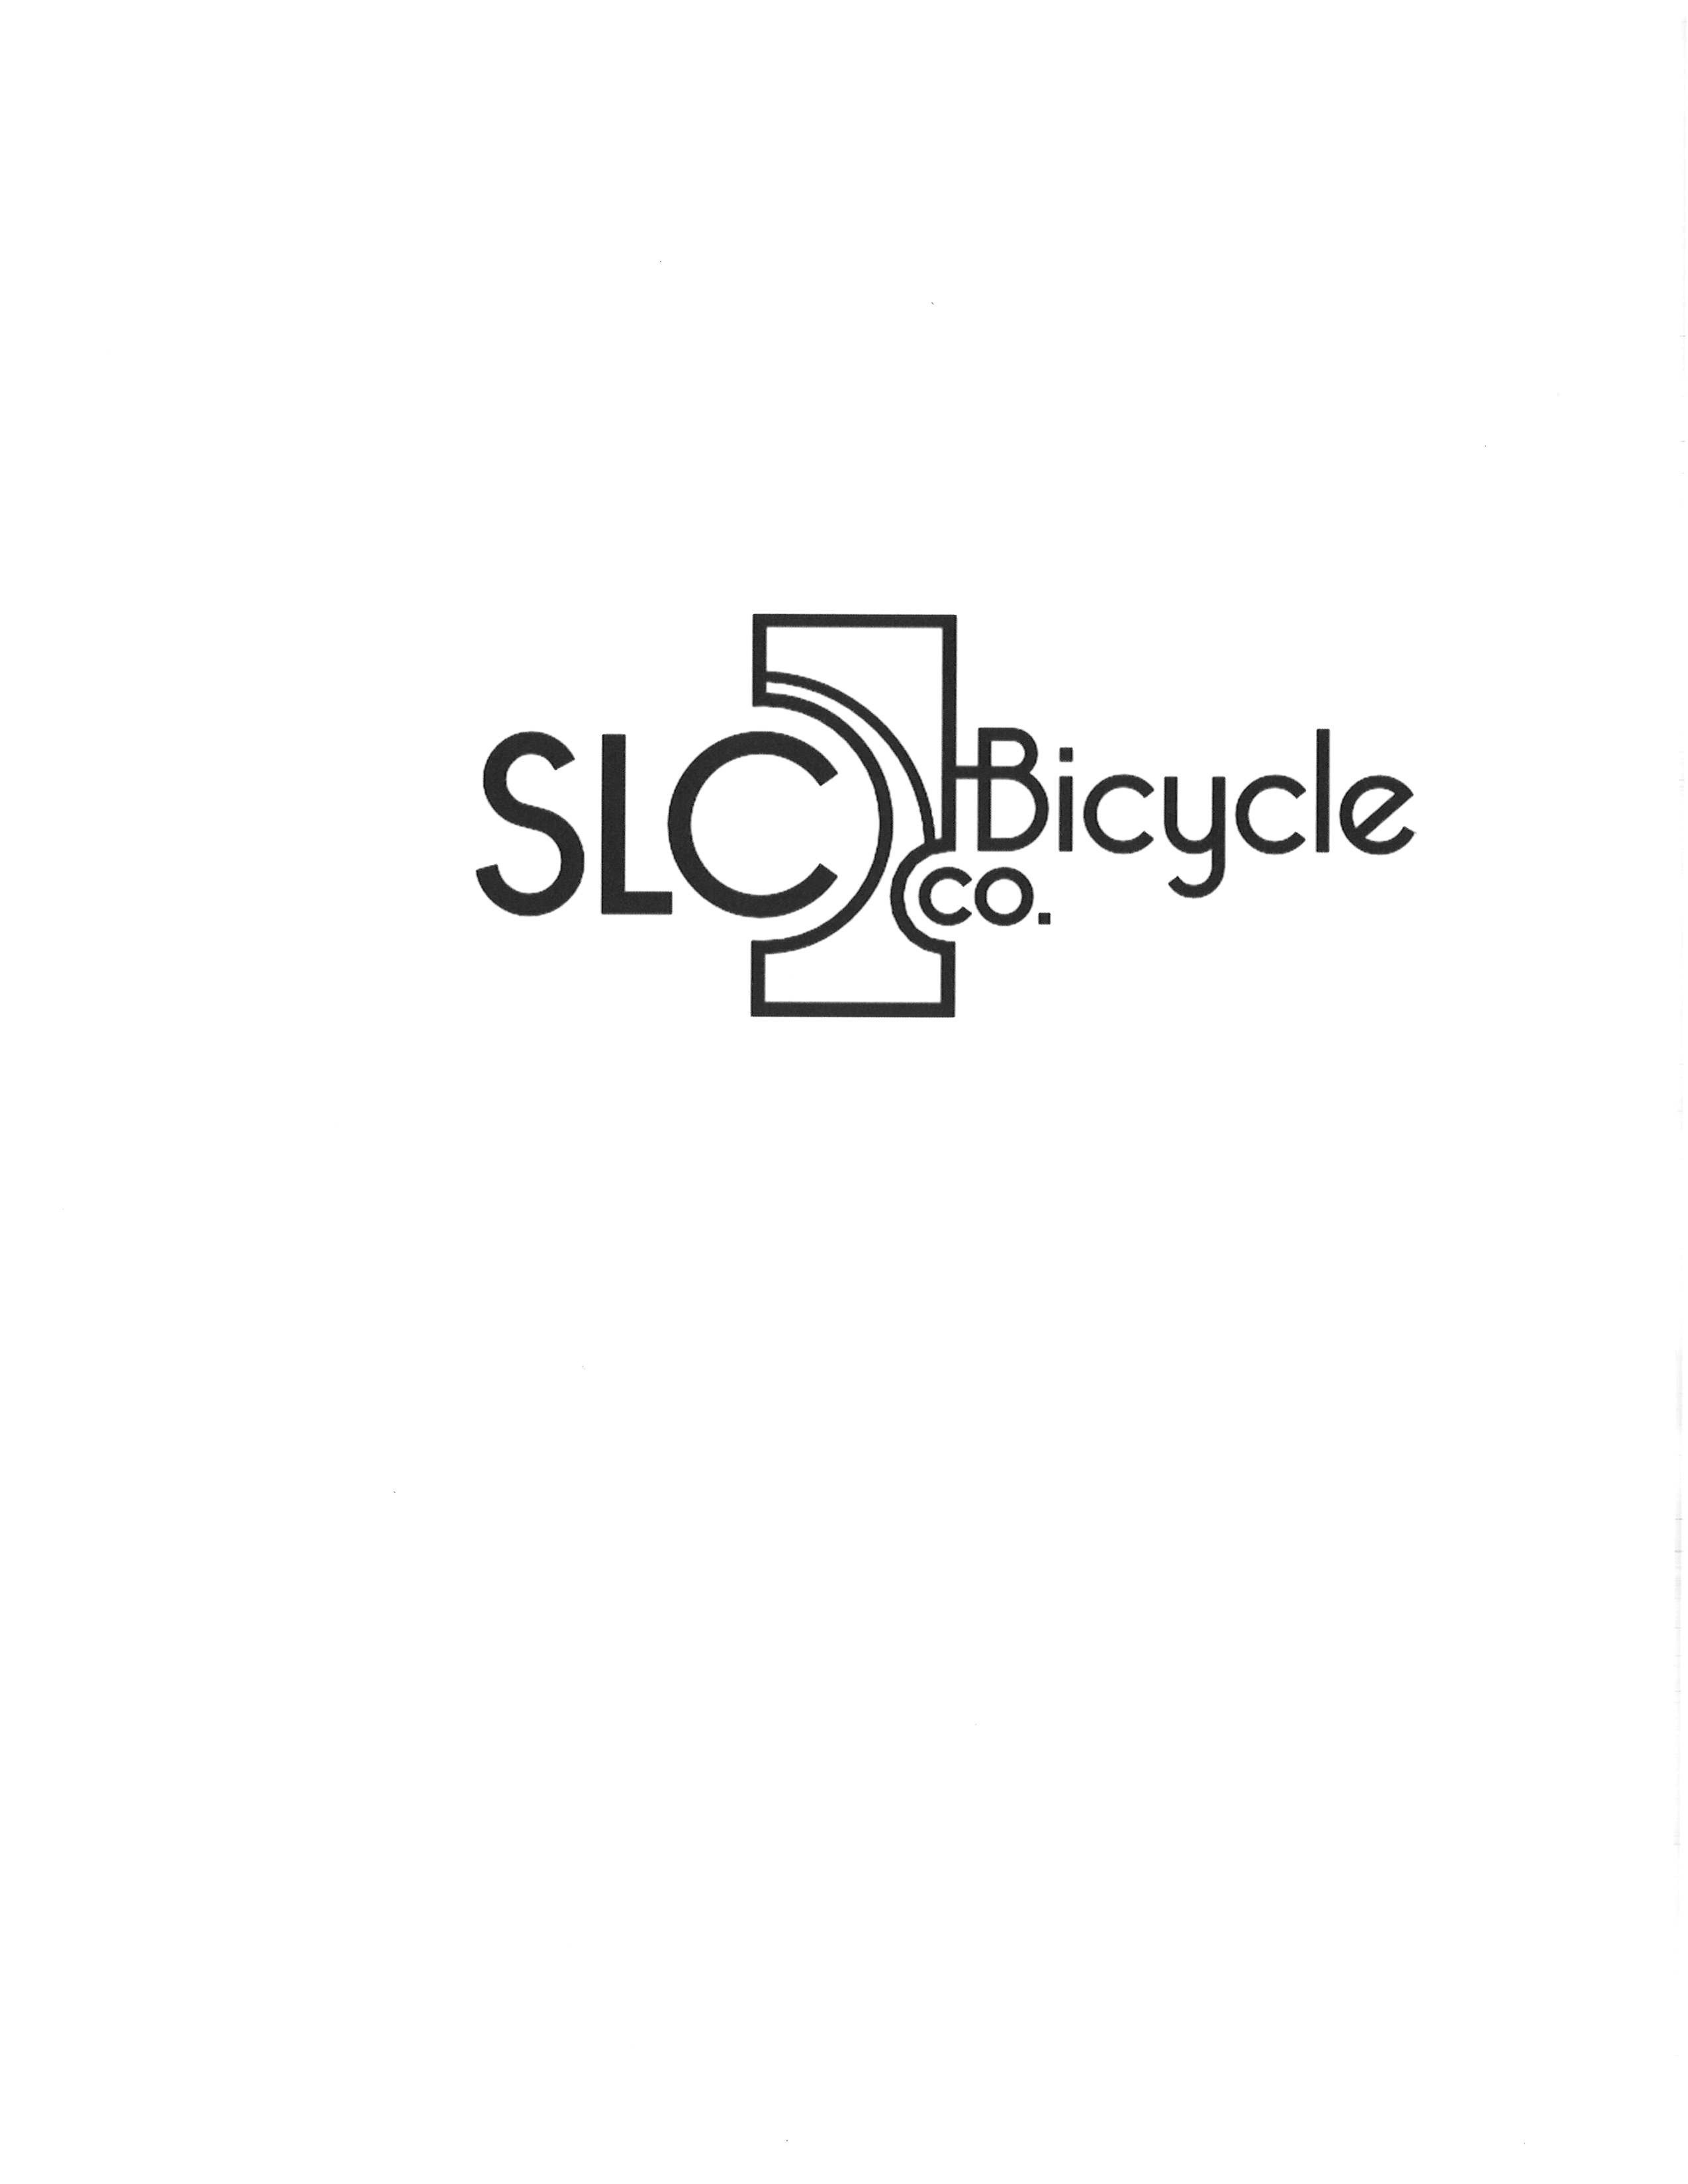  SLC BICYCLE CO.